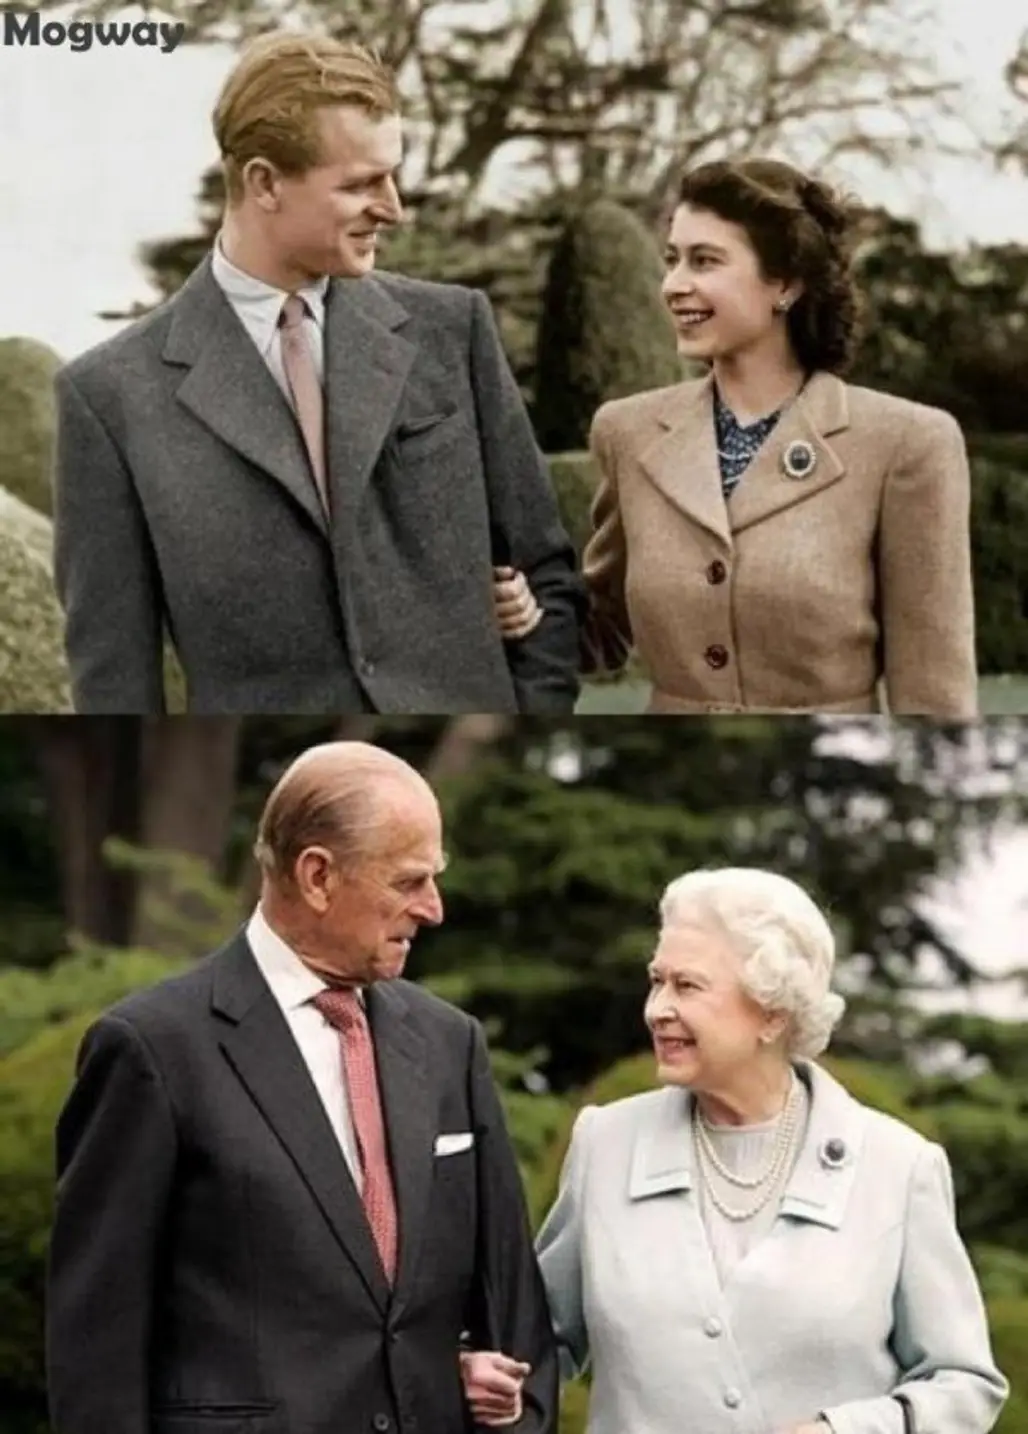 The Royal Kind of Love...